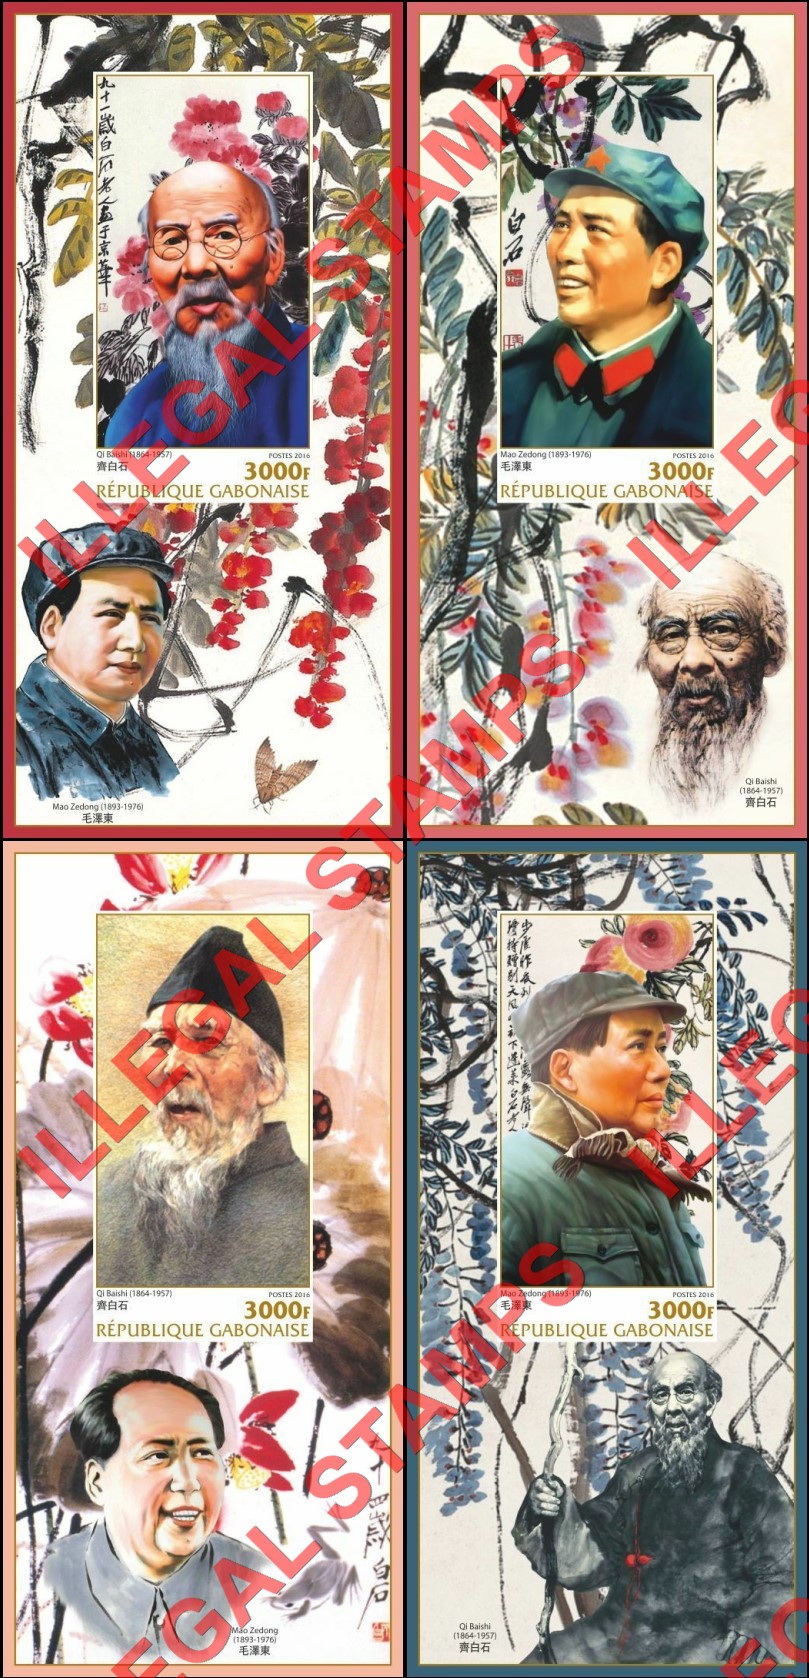 Gabon 2016 Mao Zedong and Qi Baishi Illegal Stamp Souvenir Sheets of 1 (Part 1)